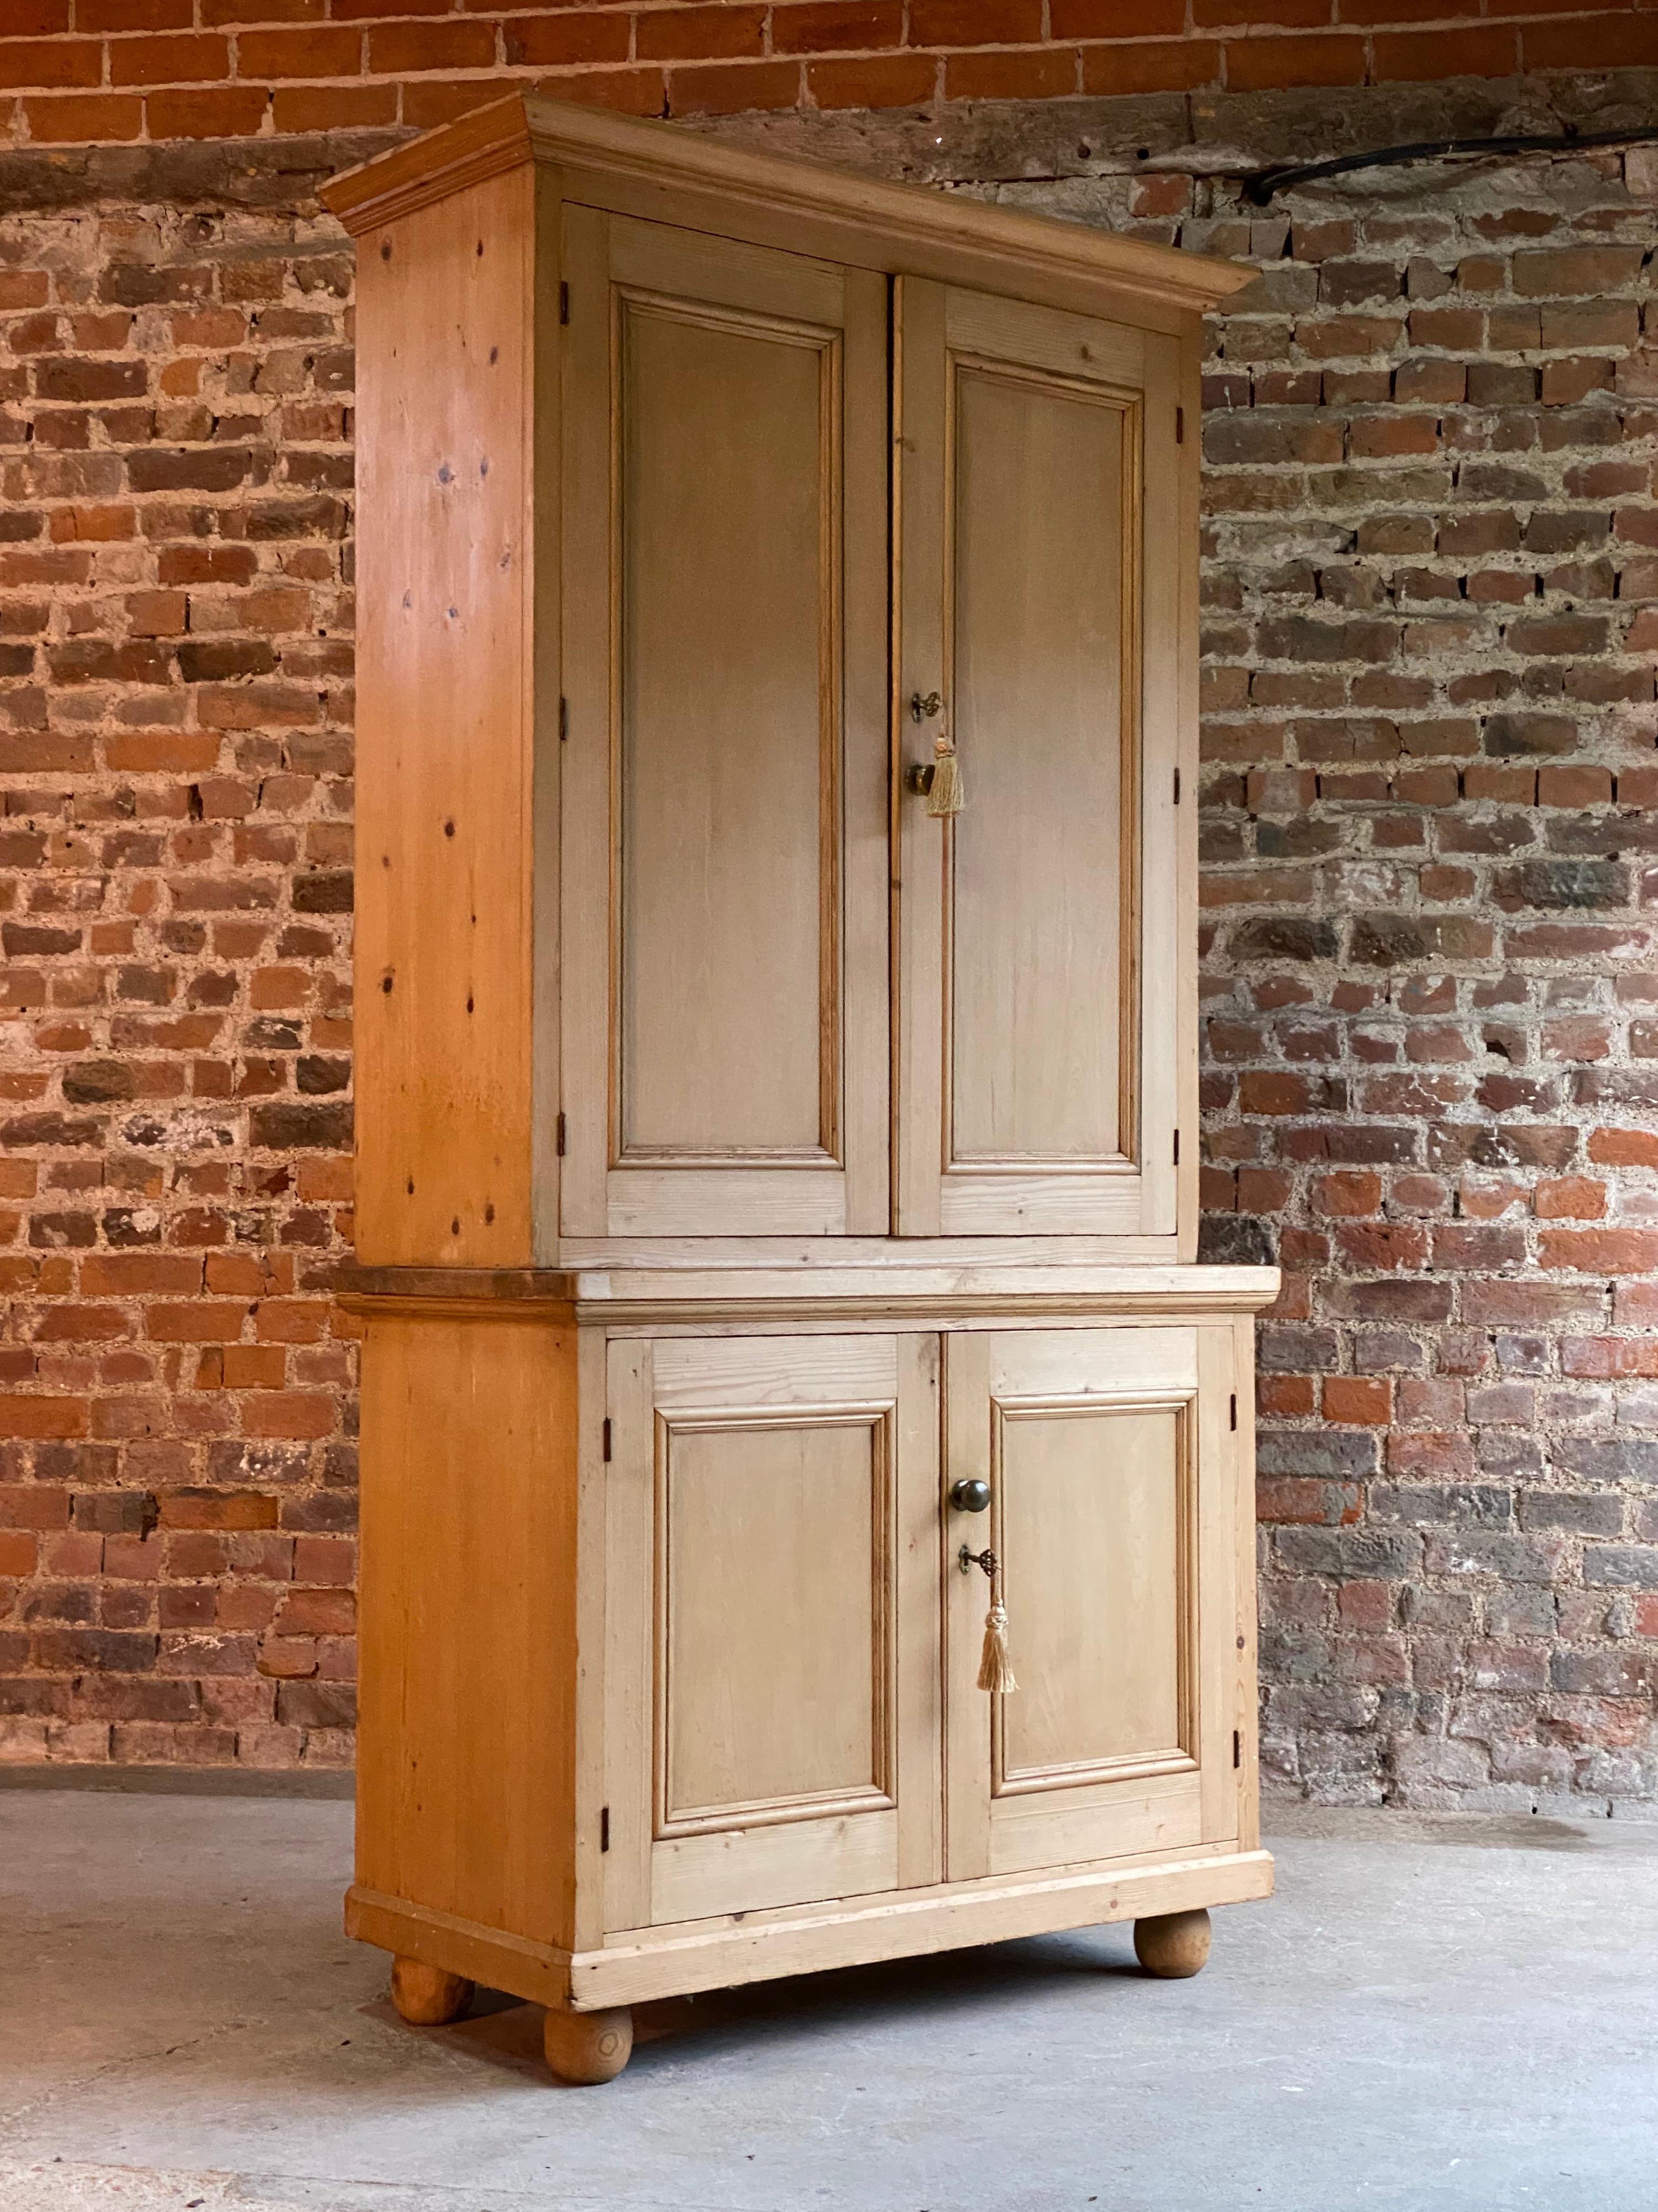 Victorian pine housekeepers cupboard pantry antique, 19th century, circa 1890

A magnificent Victorian pine housekeepers cupboard circa 1890, The top section with cornice over two paneled cupboard doors with brass knob handle, three full length